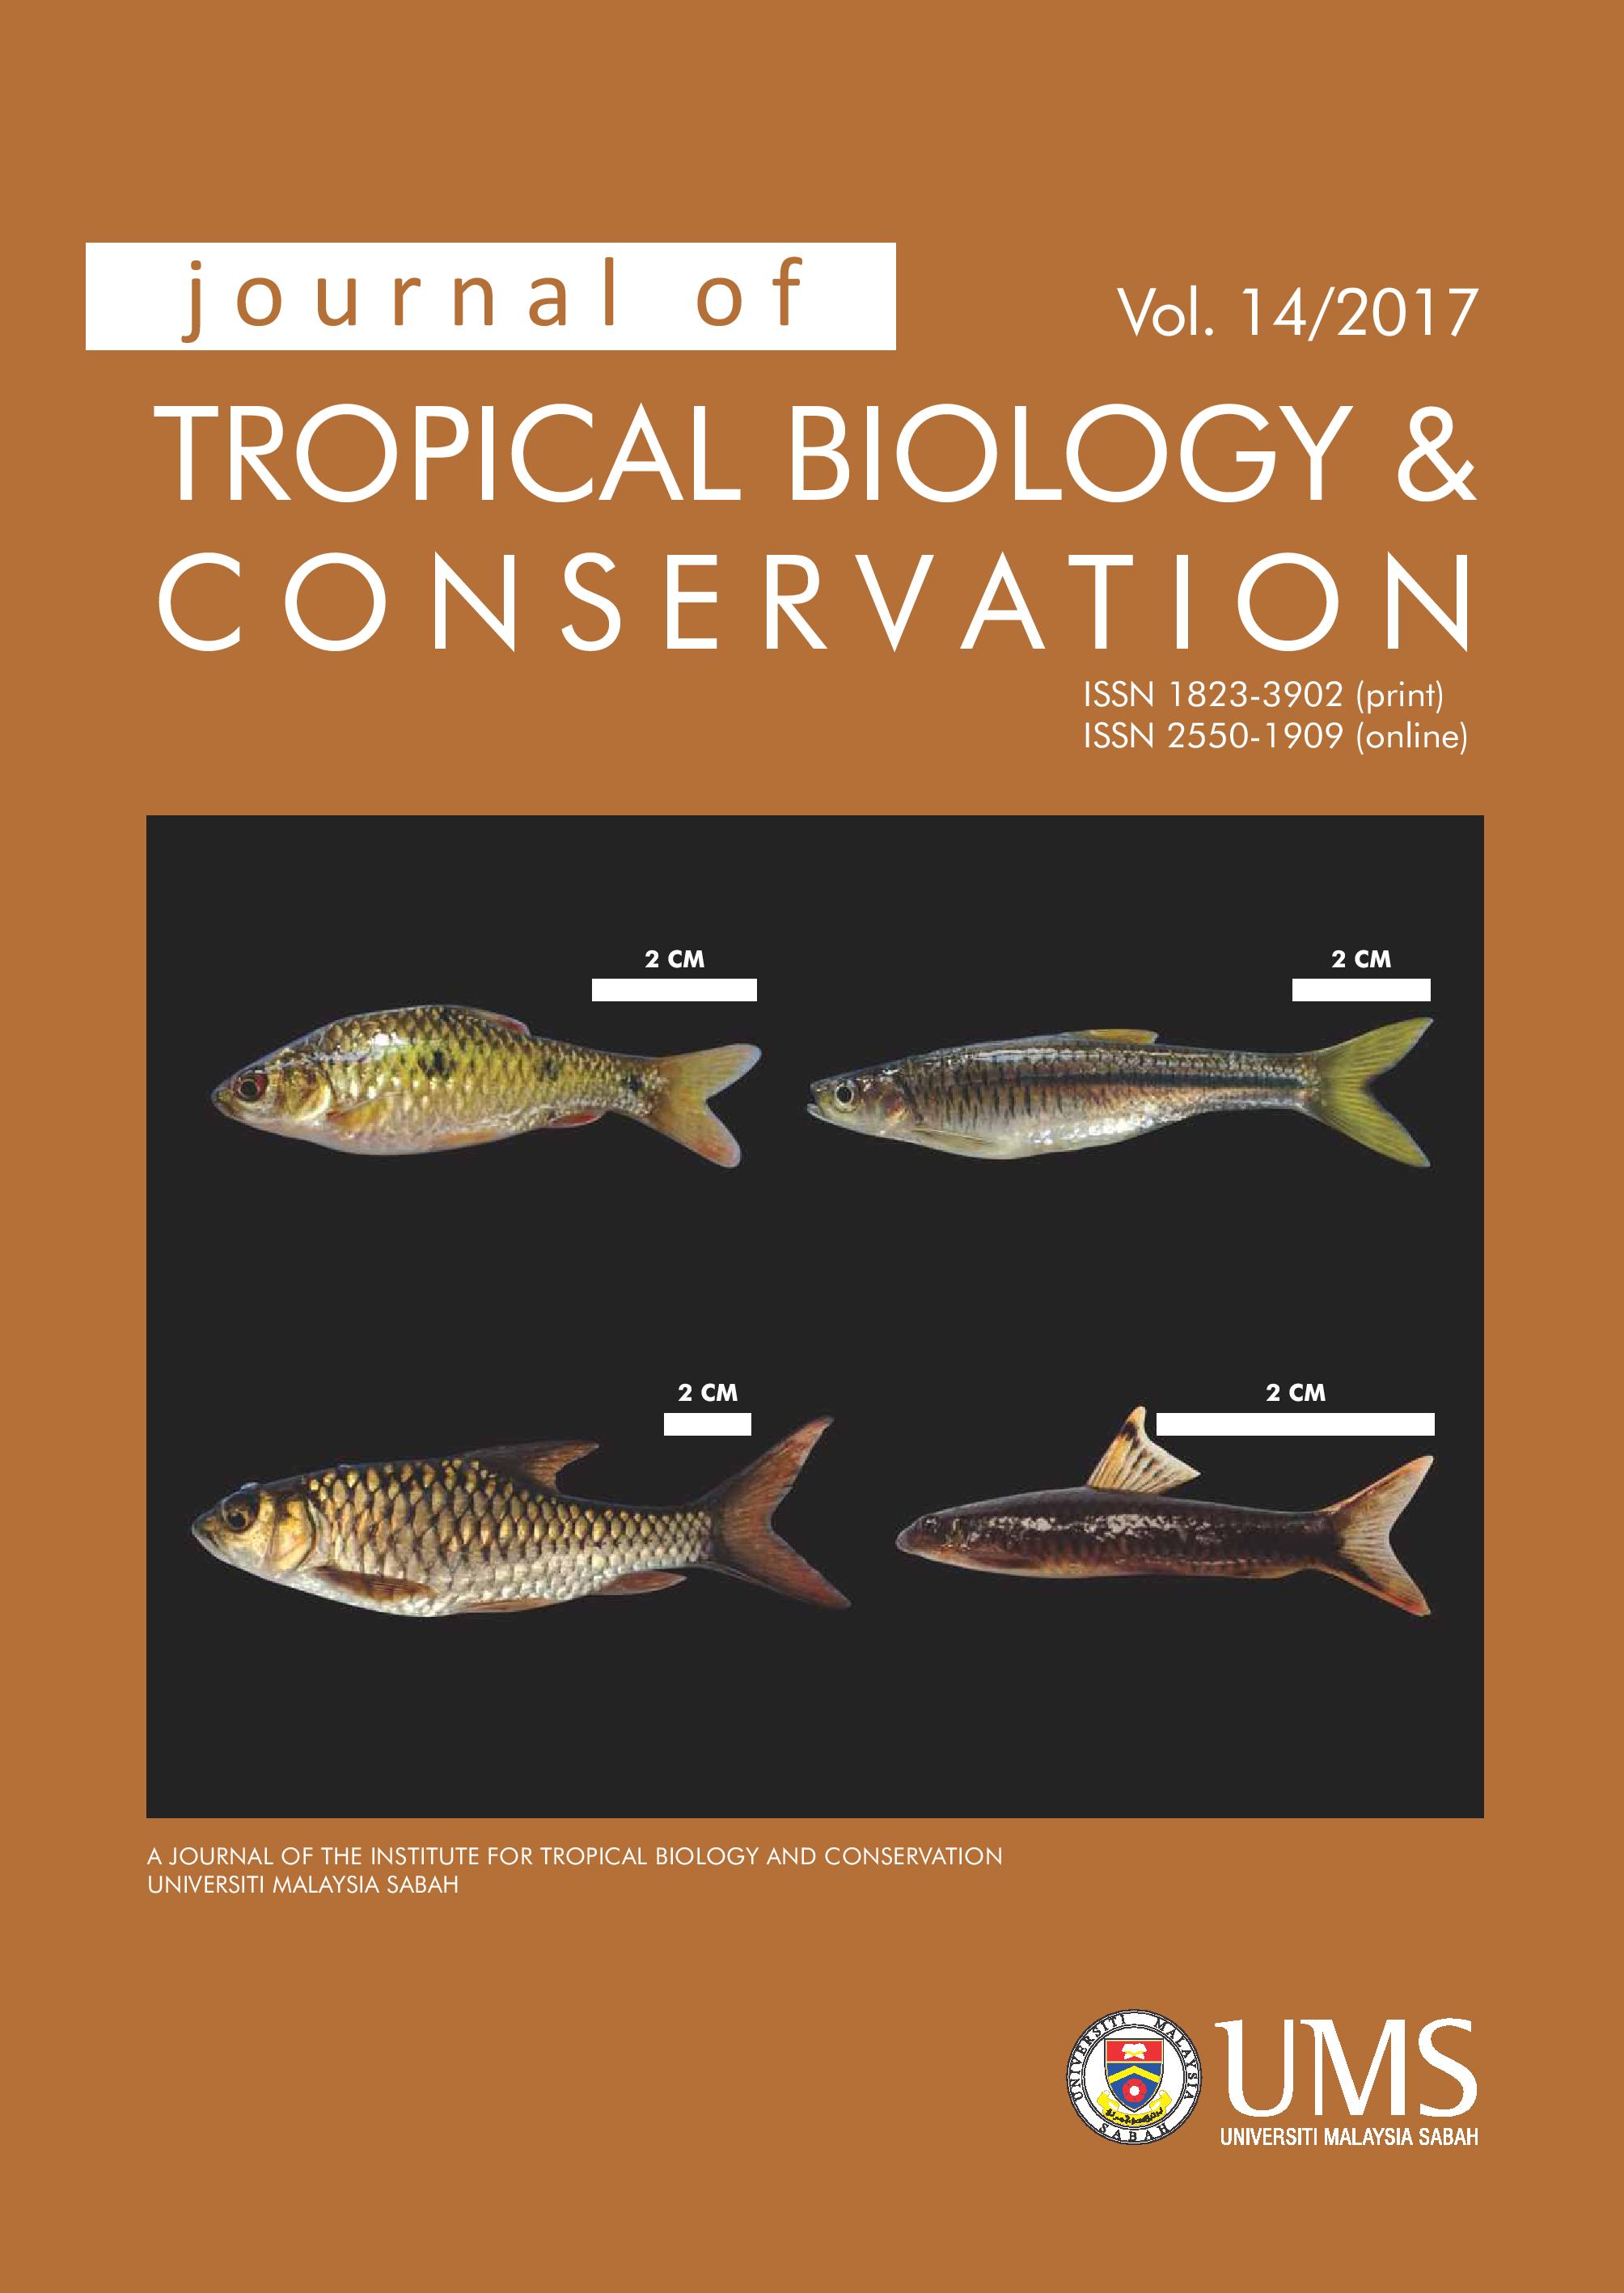 					View Vol. 14 (2017): Journal of Tropical Biology and Conservation No. 14/2017
				